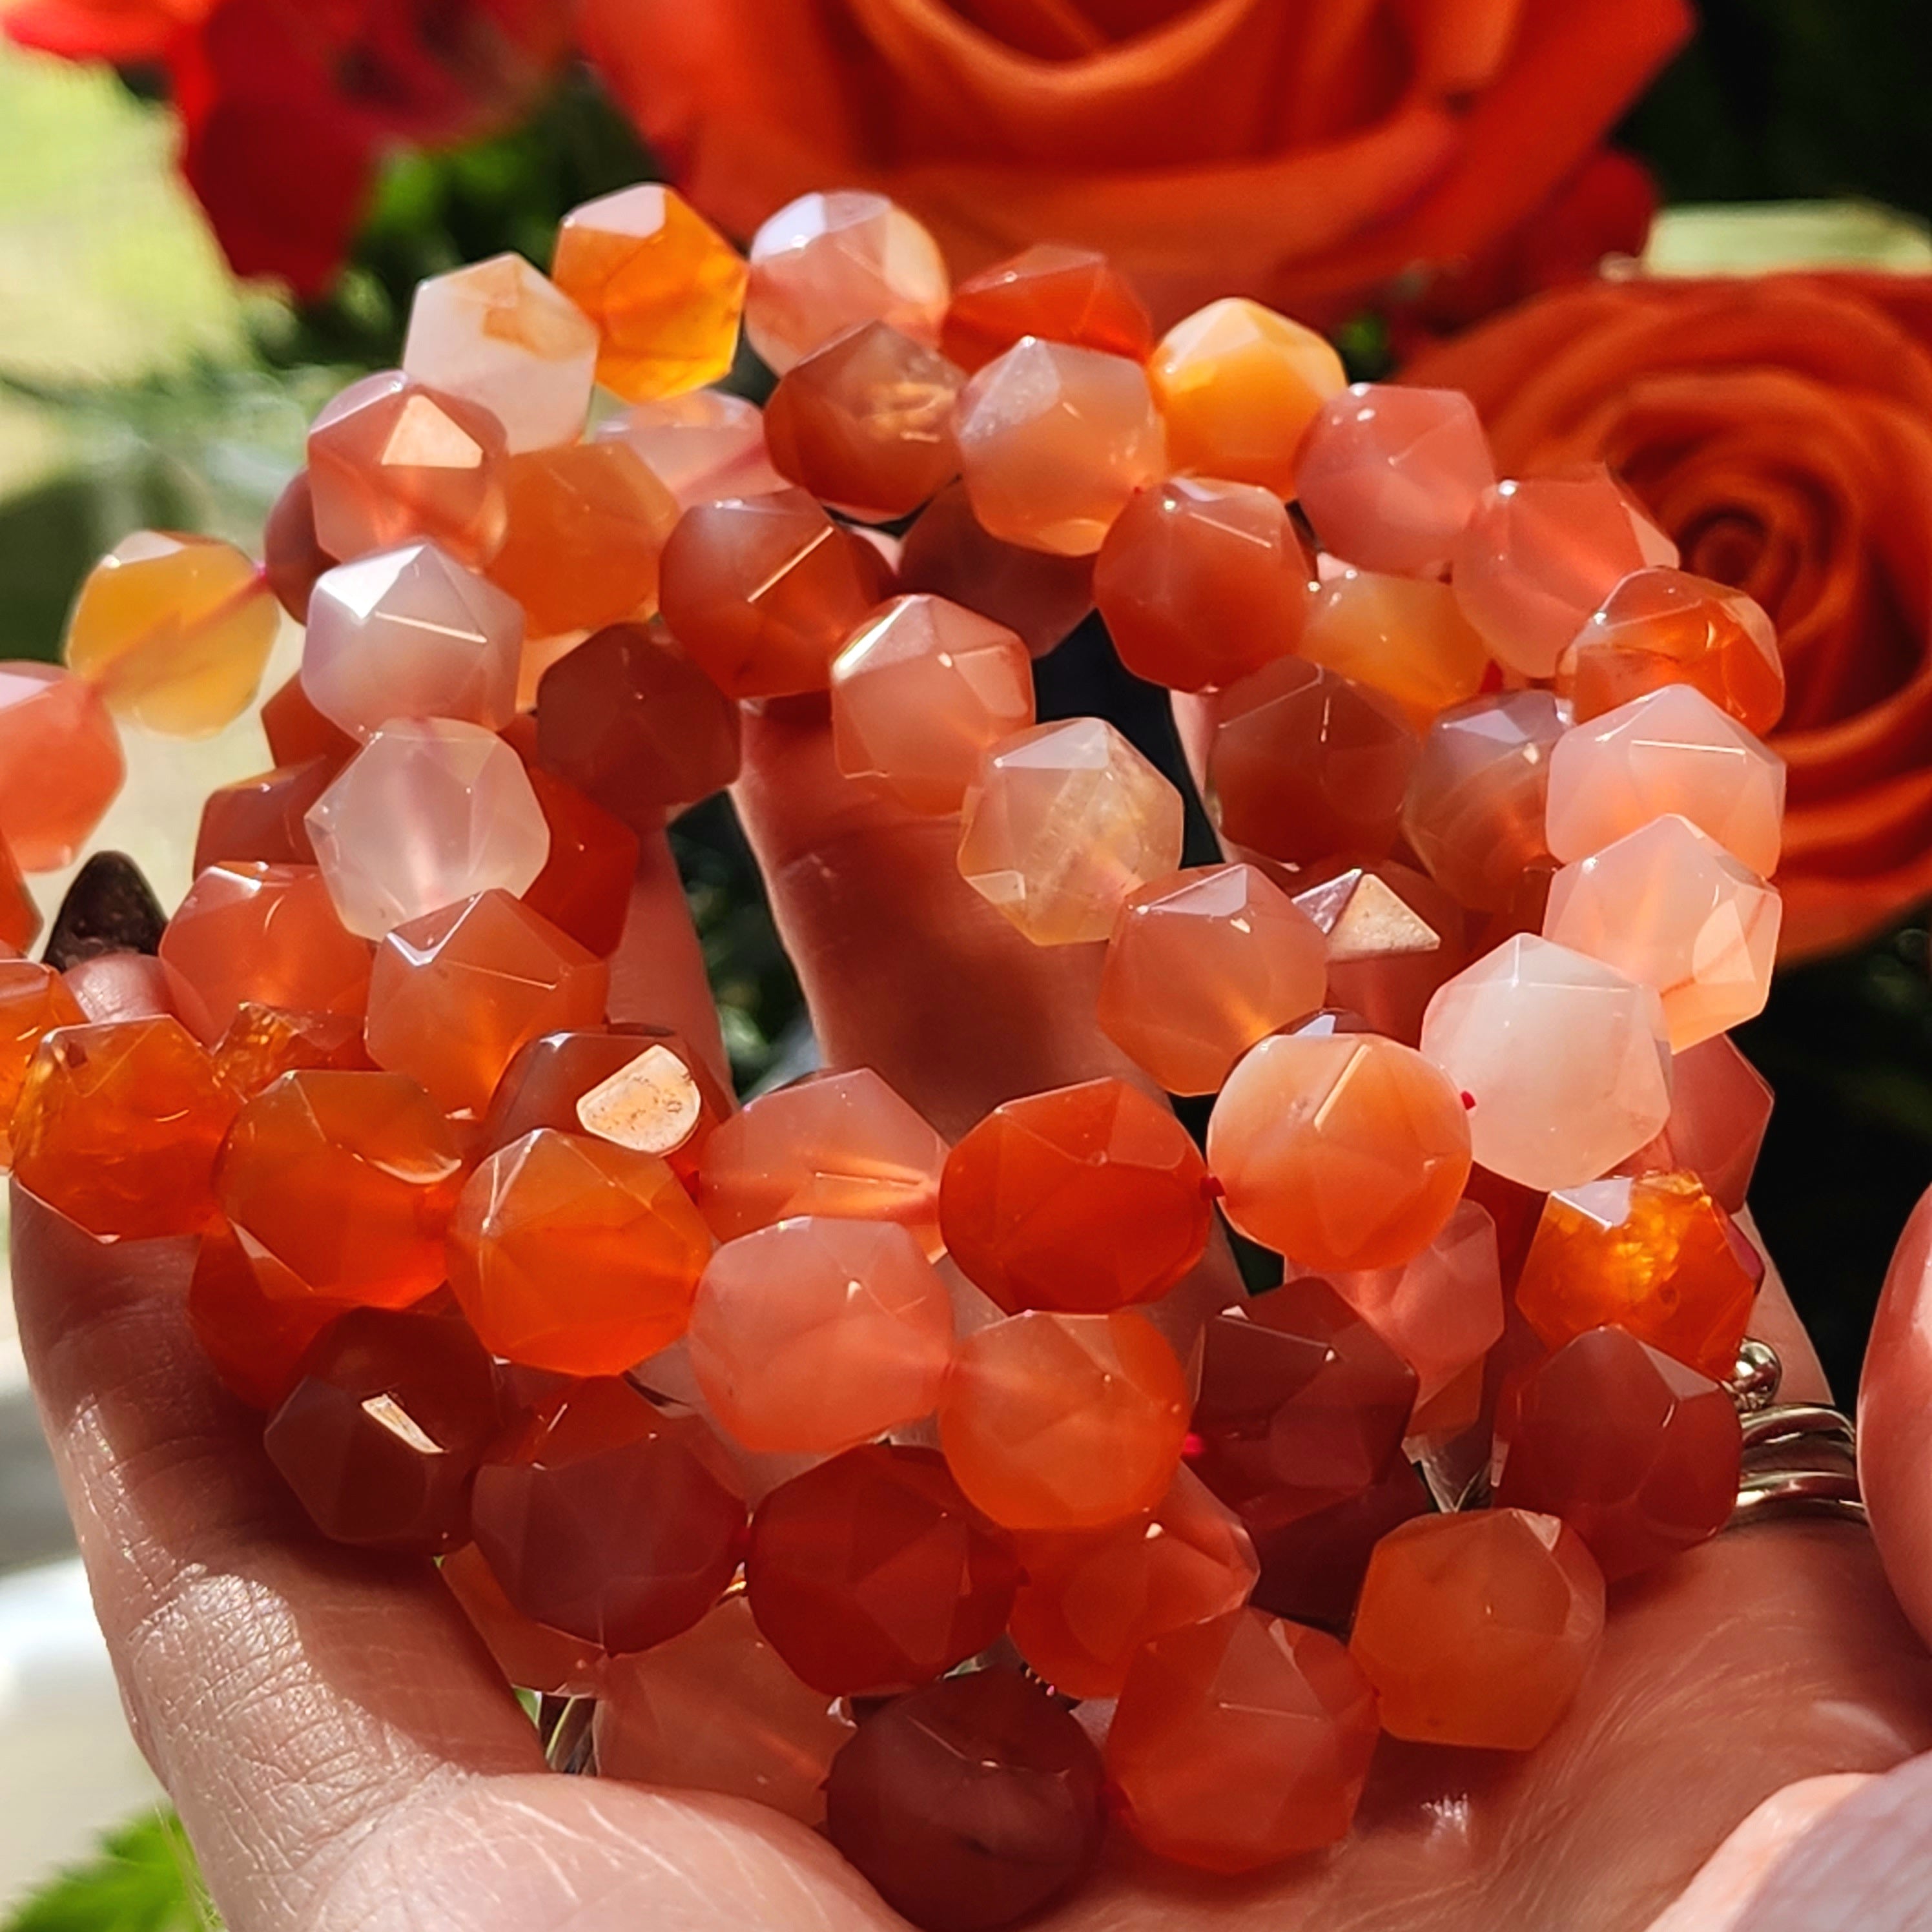 Yanyuan Agate Star Faceted Bracelet for Achieving Goals, Confidence and Health